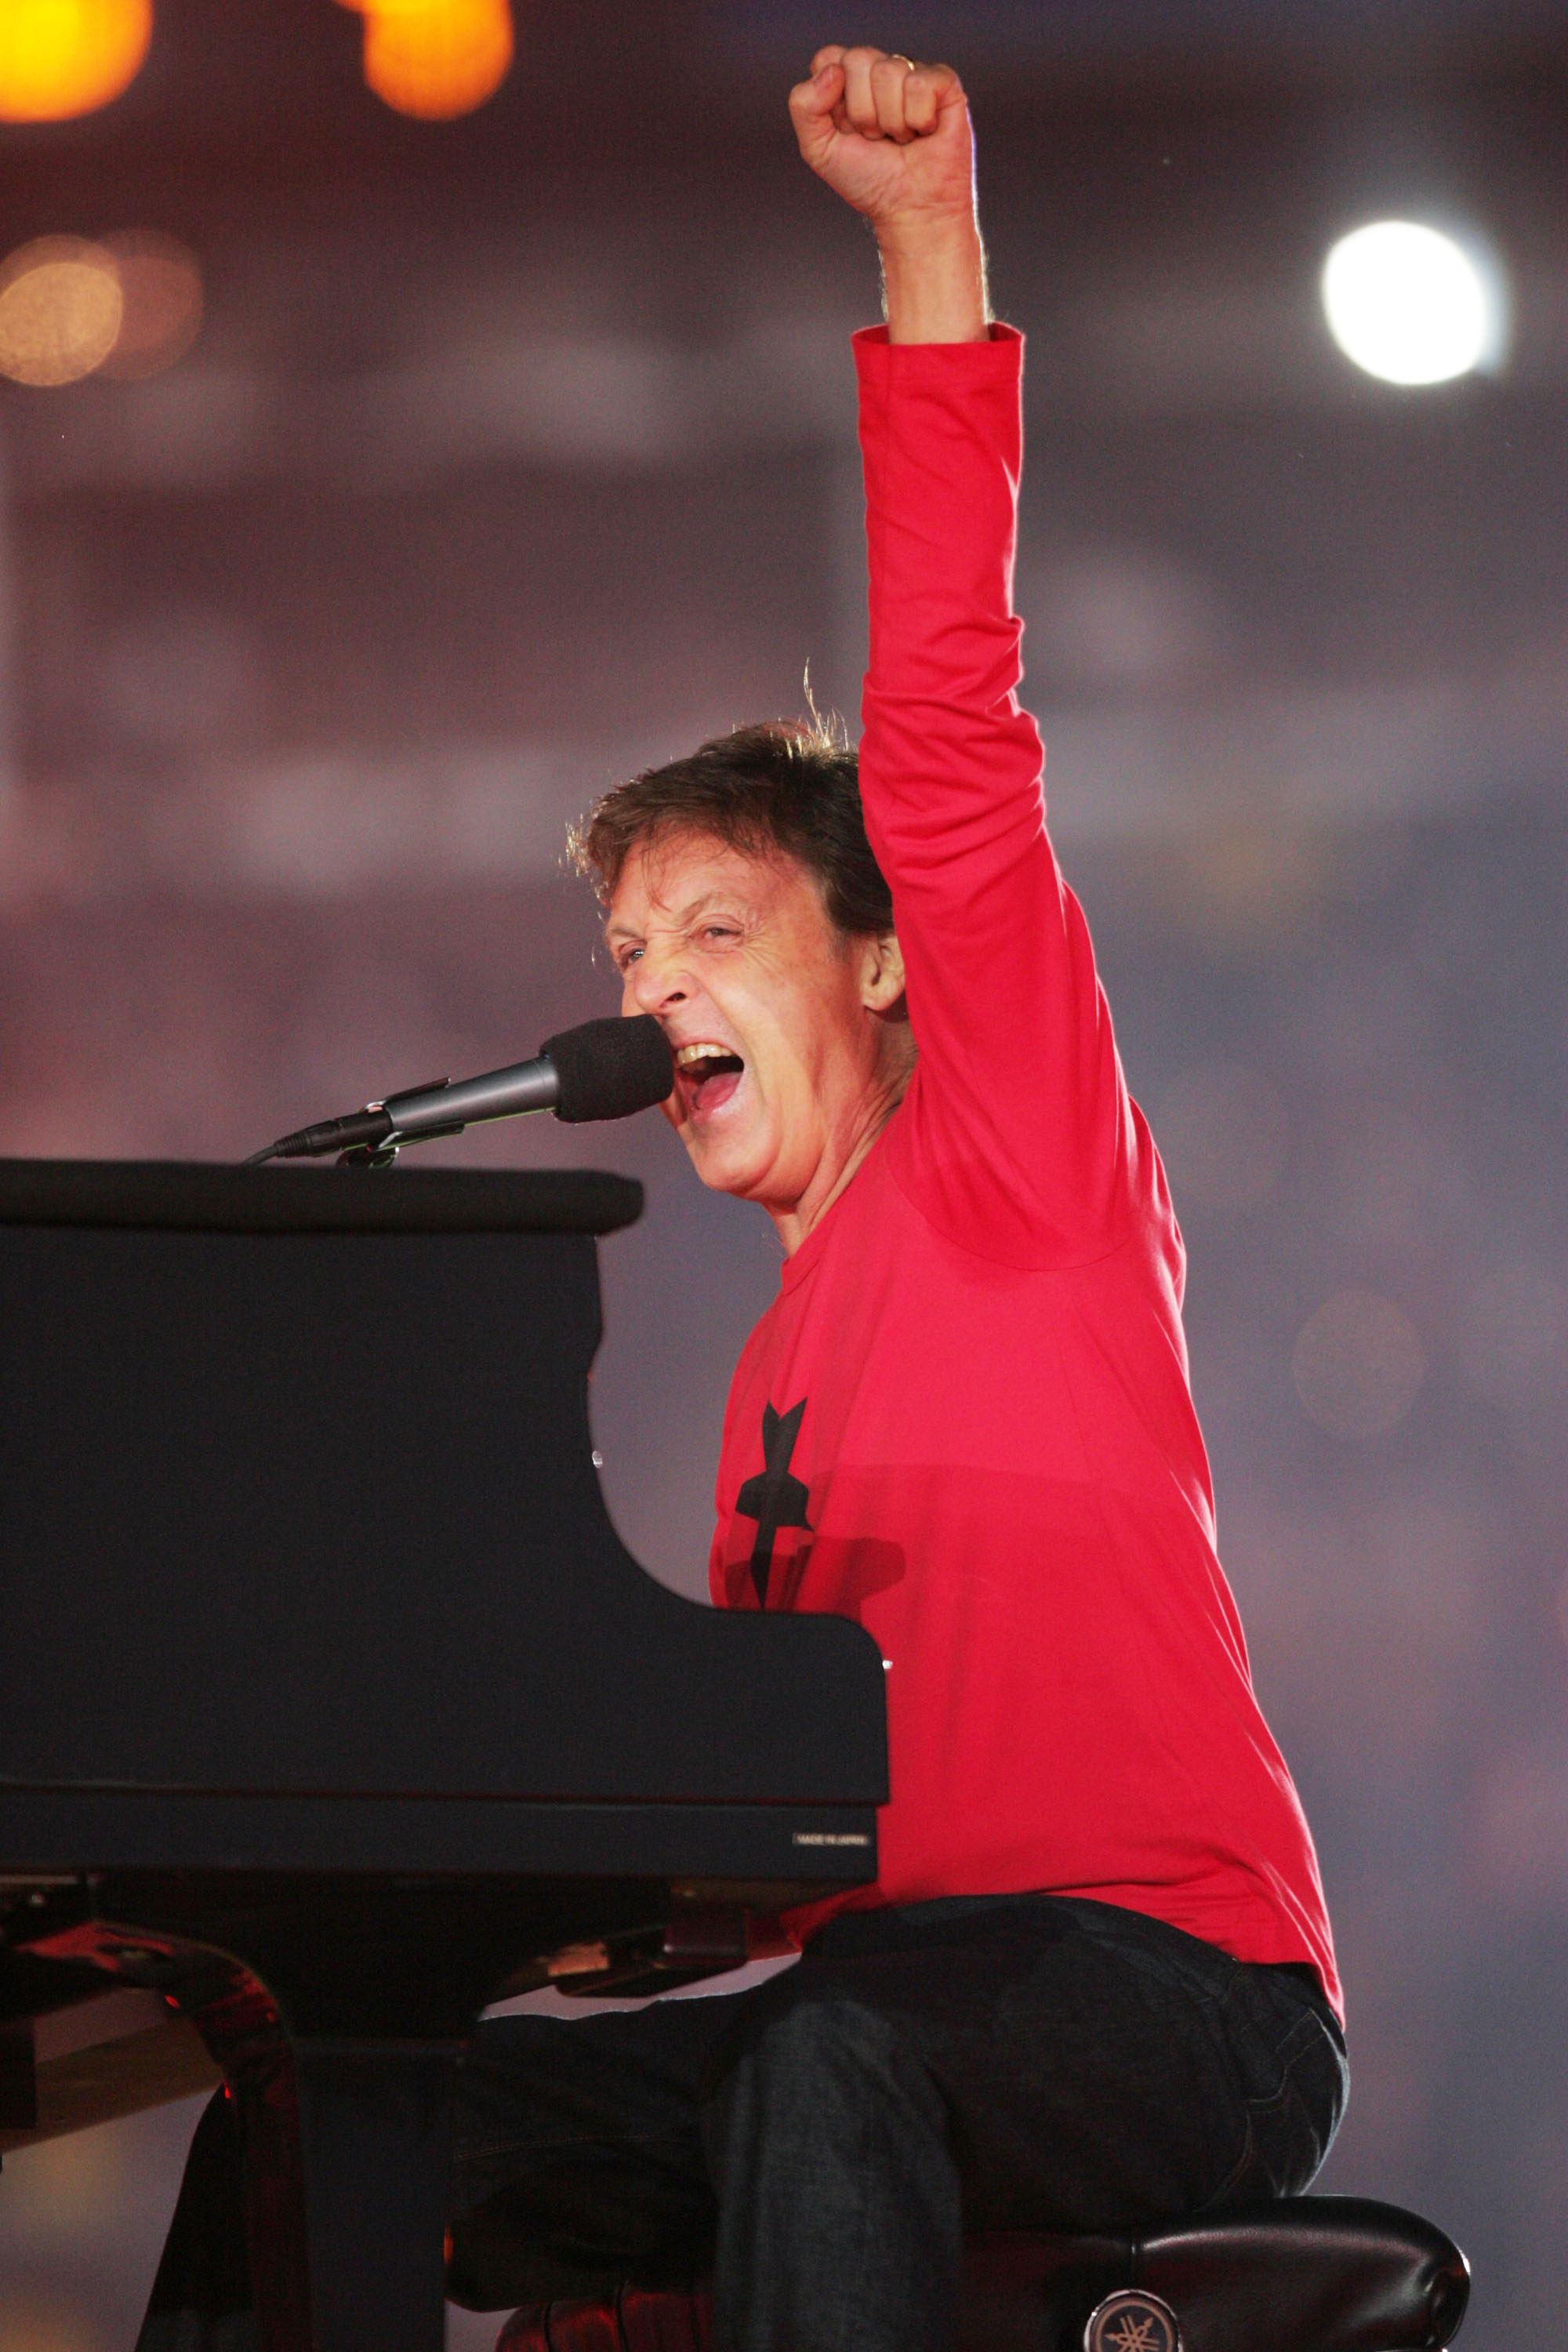 Paul McCartney performs during Super Bowl XXXIX on Feb. 6, 2005 in Jacksonville, Fla.